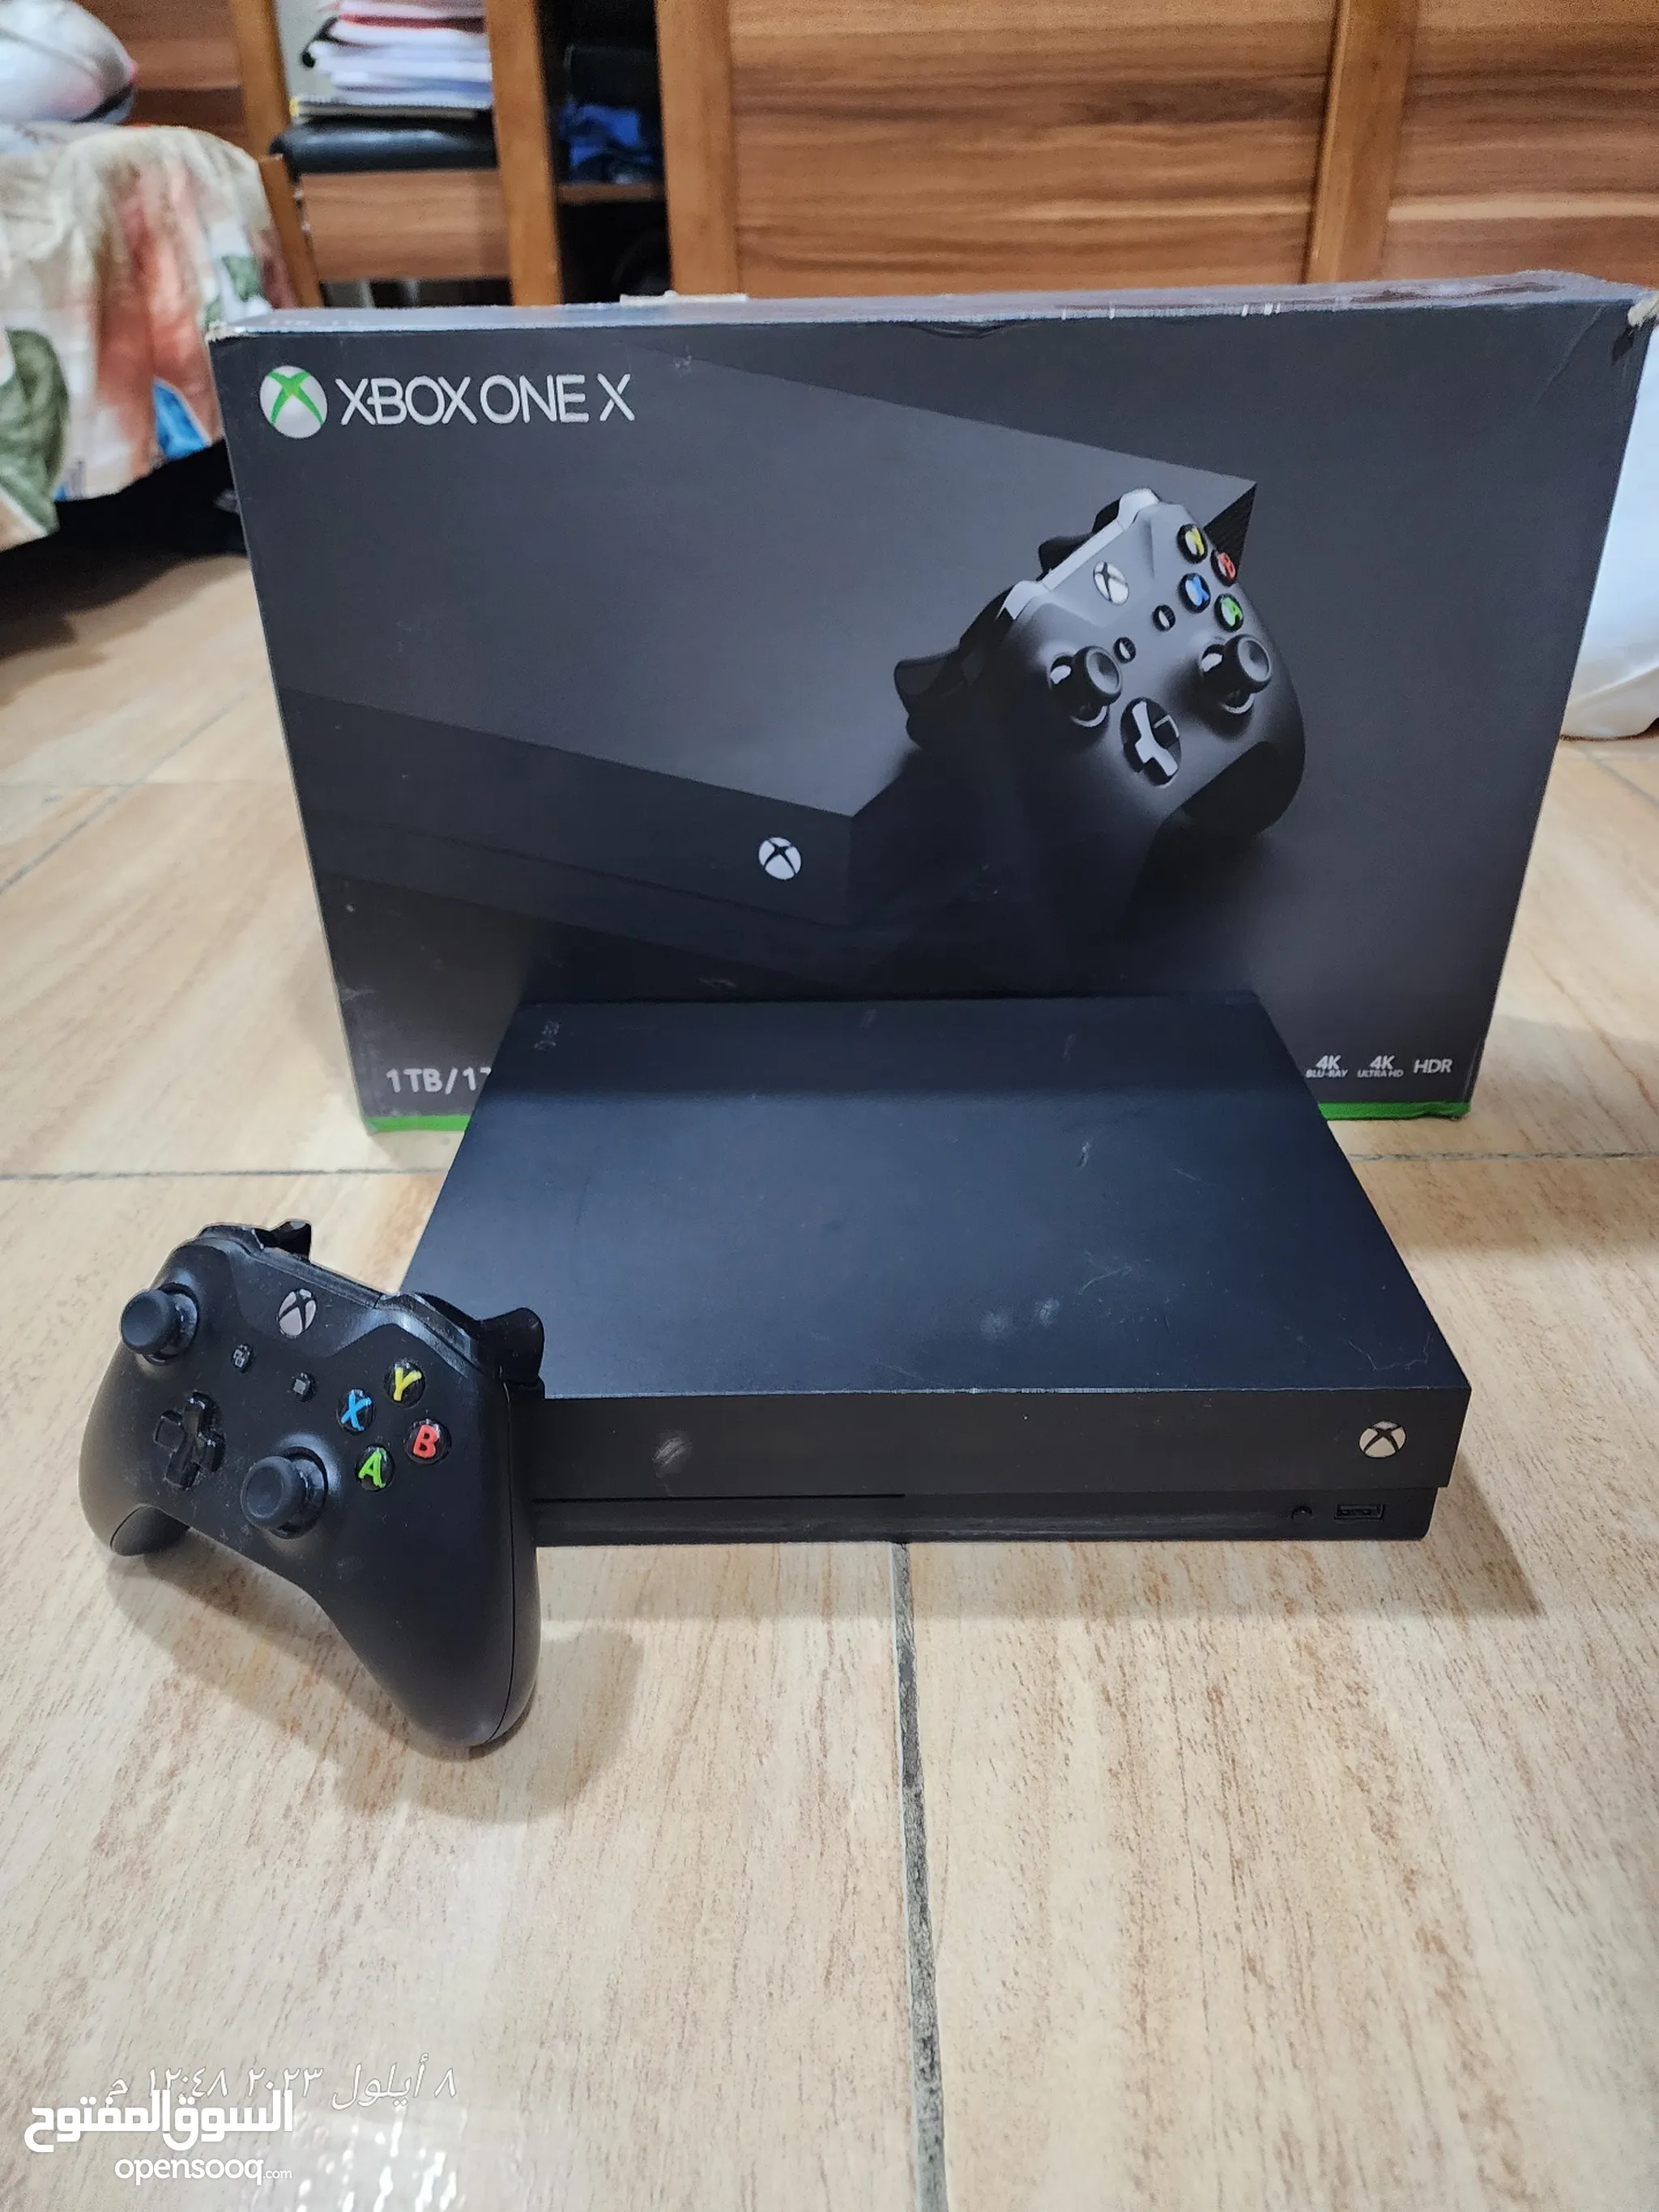 Xbox One X For Sale in Iraq : Used : Best Prices | OpenSooq